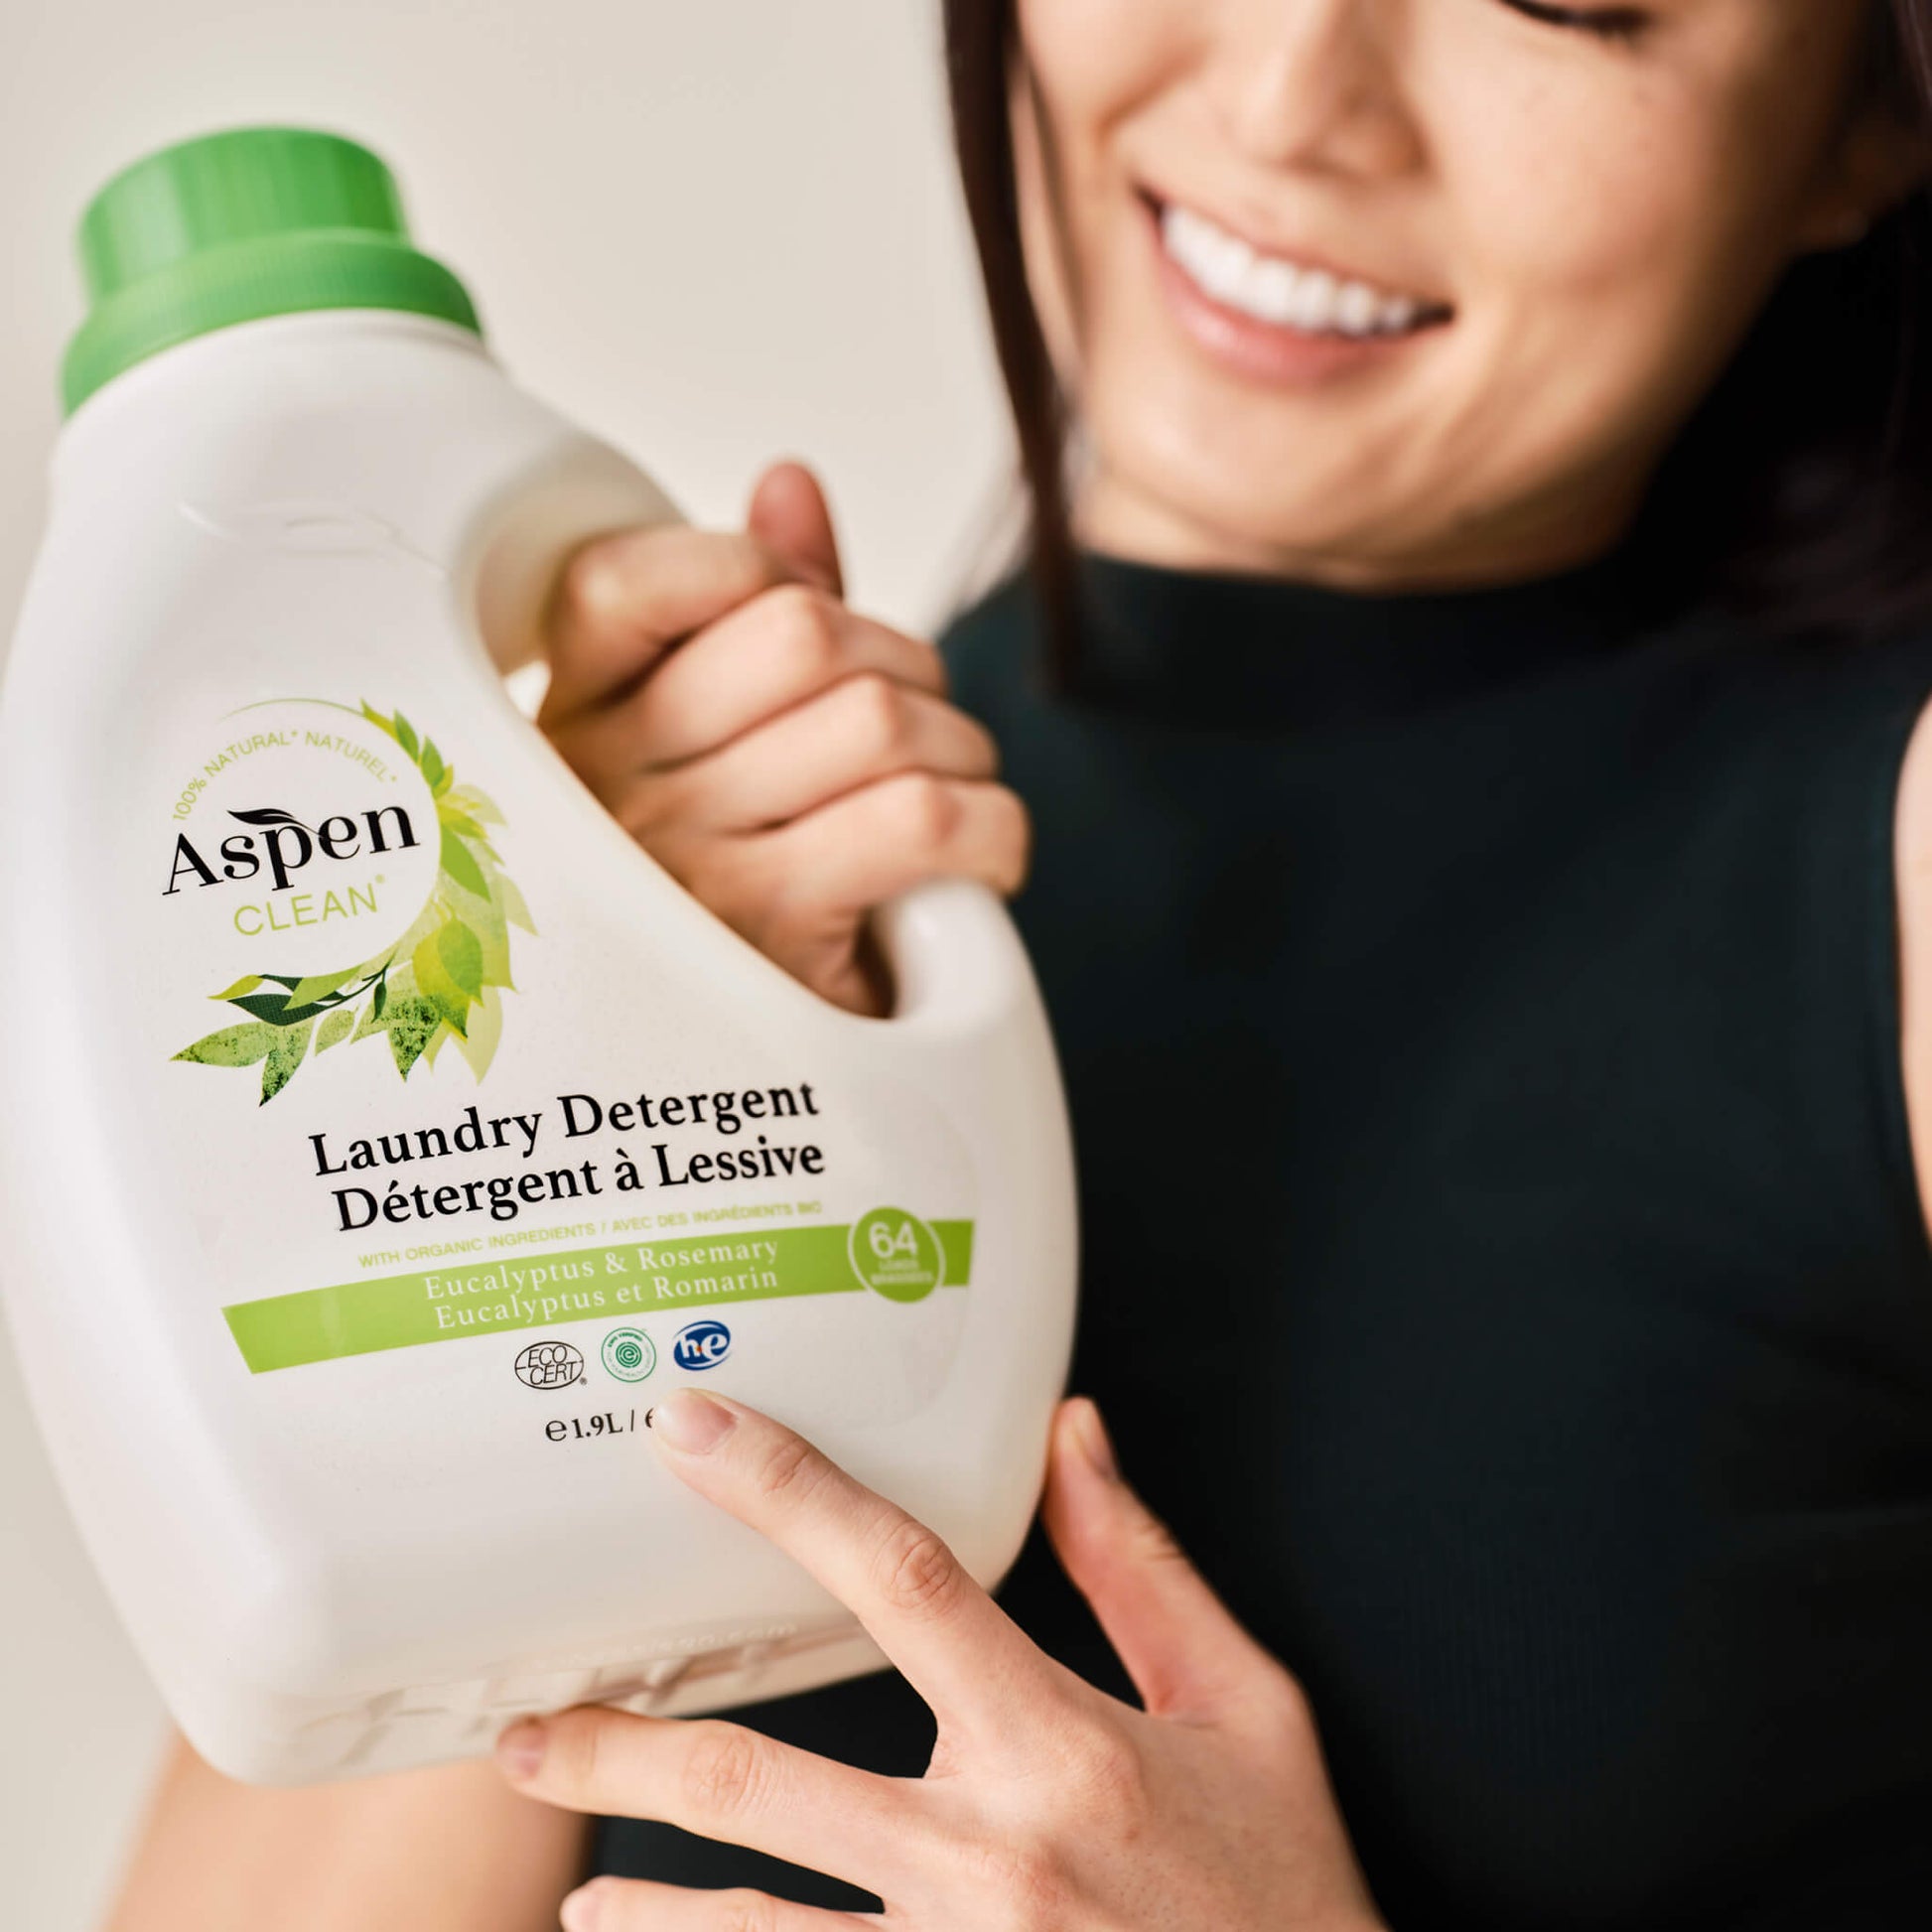 Lady is holding AspenClean Laundry Detergent Eucalyptus